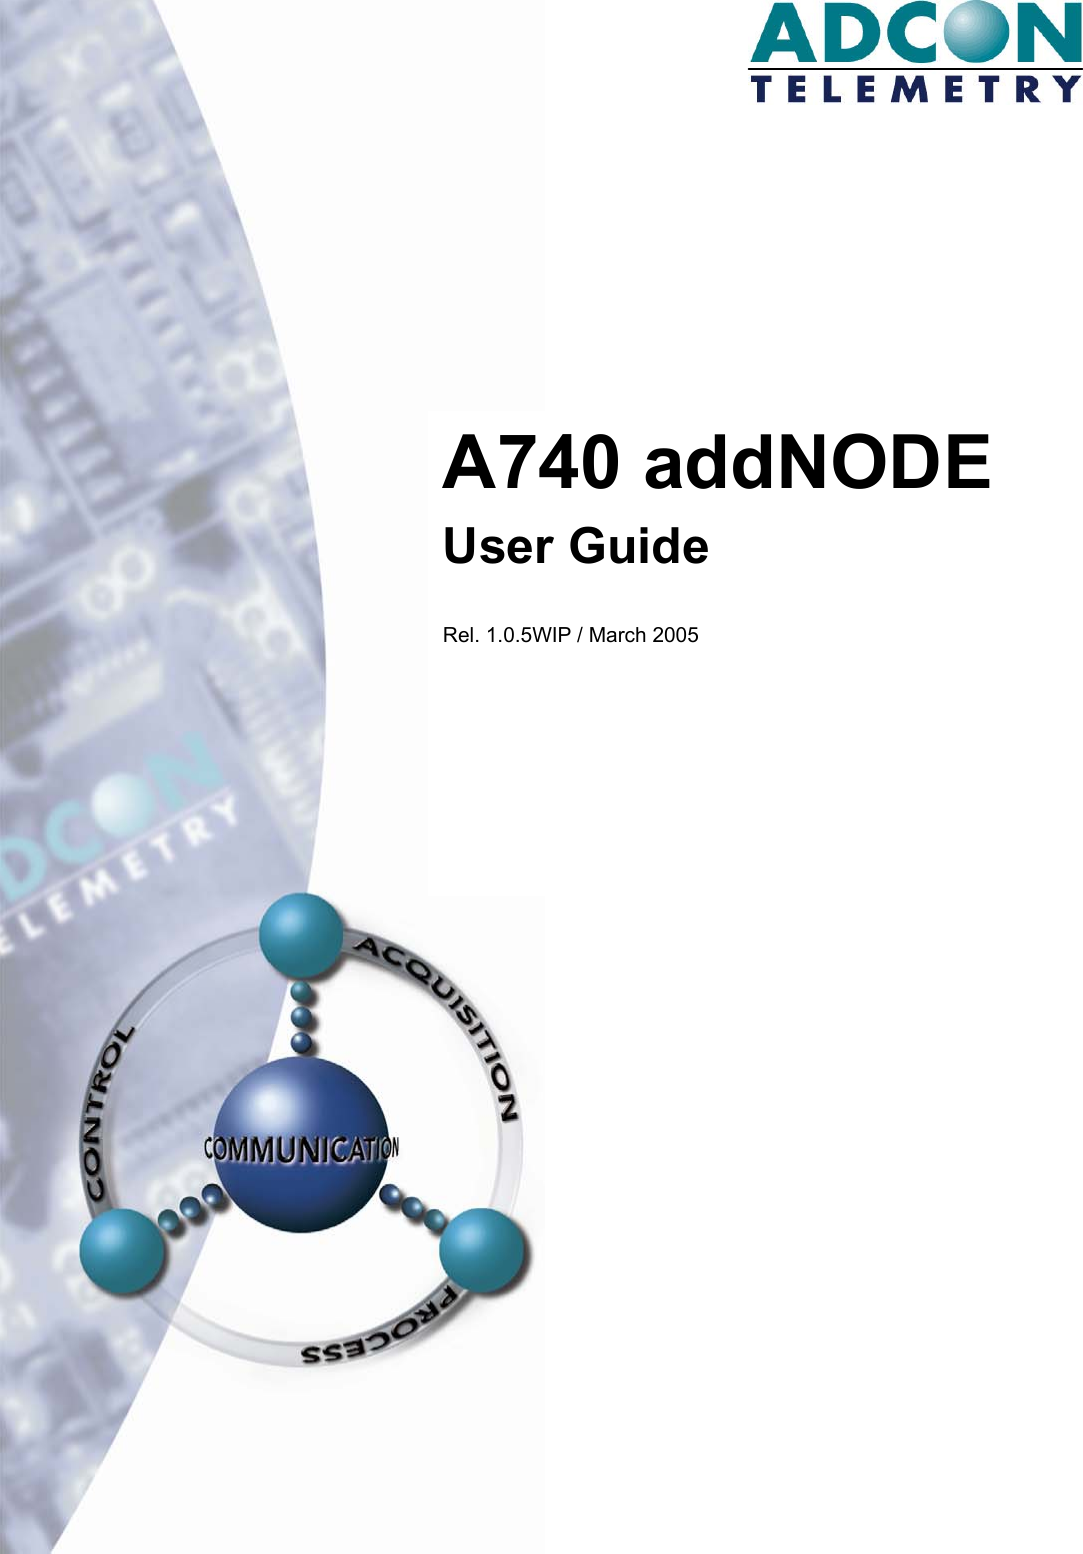         A740 addNODE  User Guide  Rel. 1.0.5WIP / March 2005 